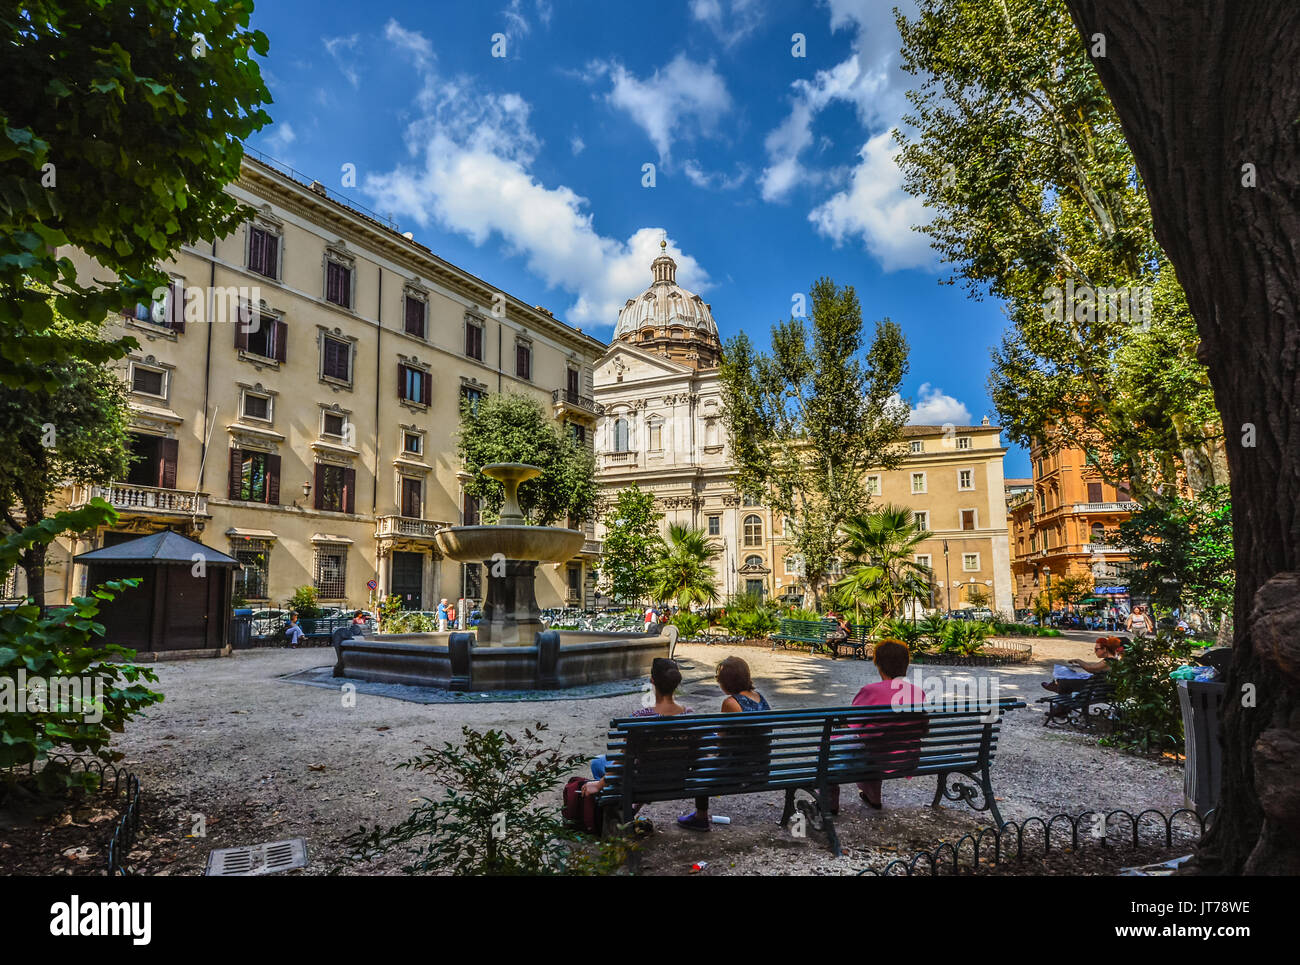 Small piazza in Rome Italy as ladies relax on a park bench in the shade with a church dome in the background on a sunny day Stock Photo